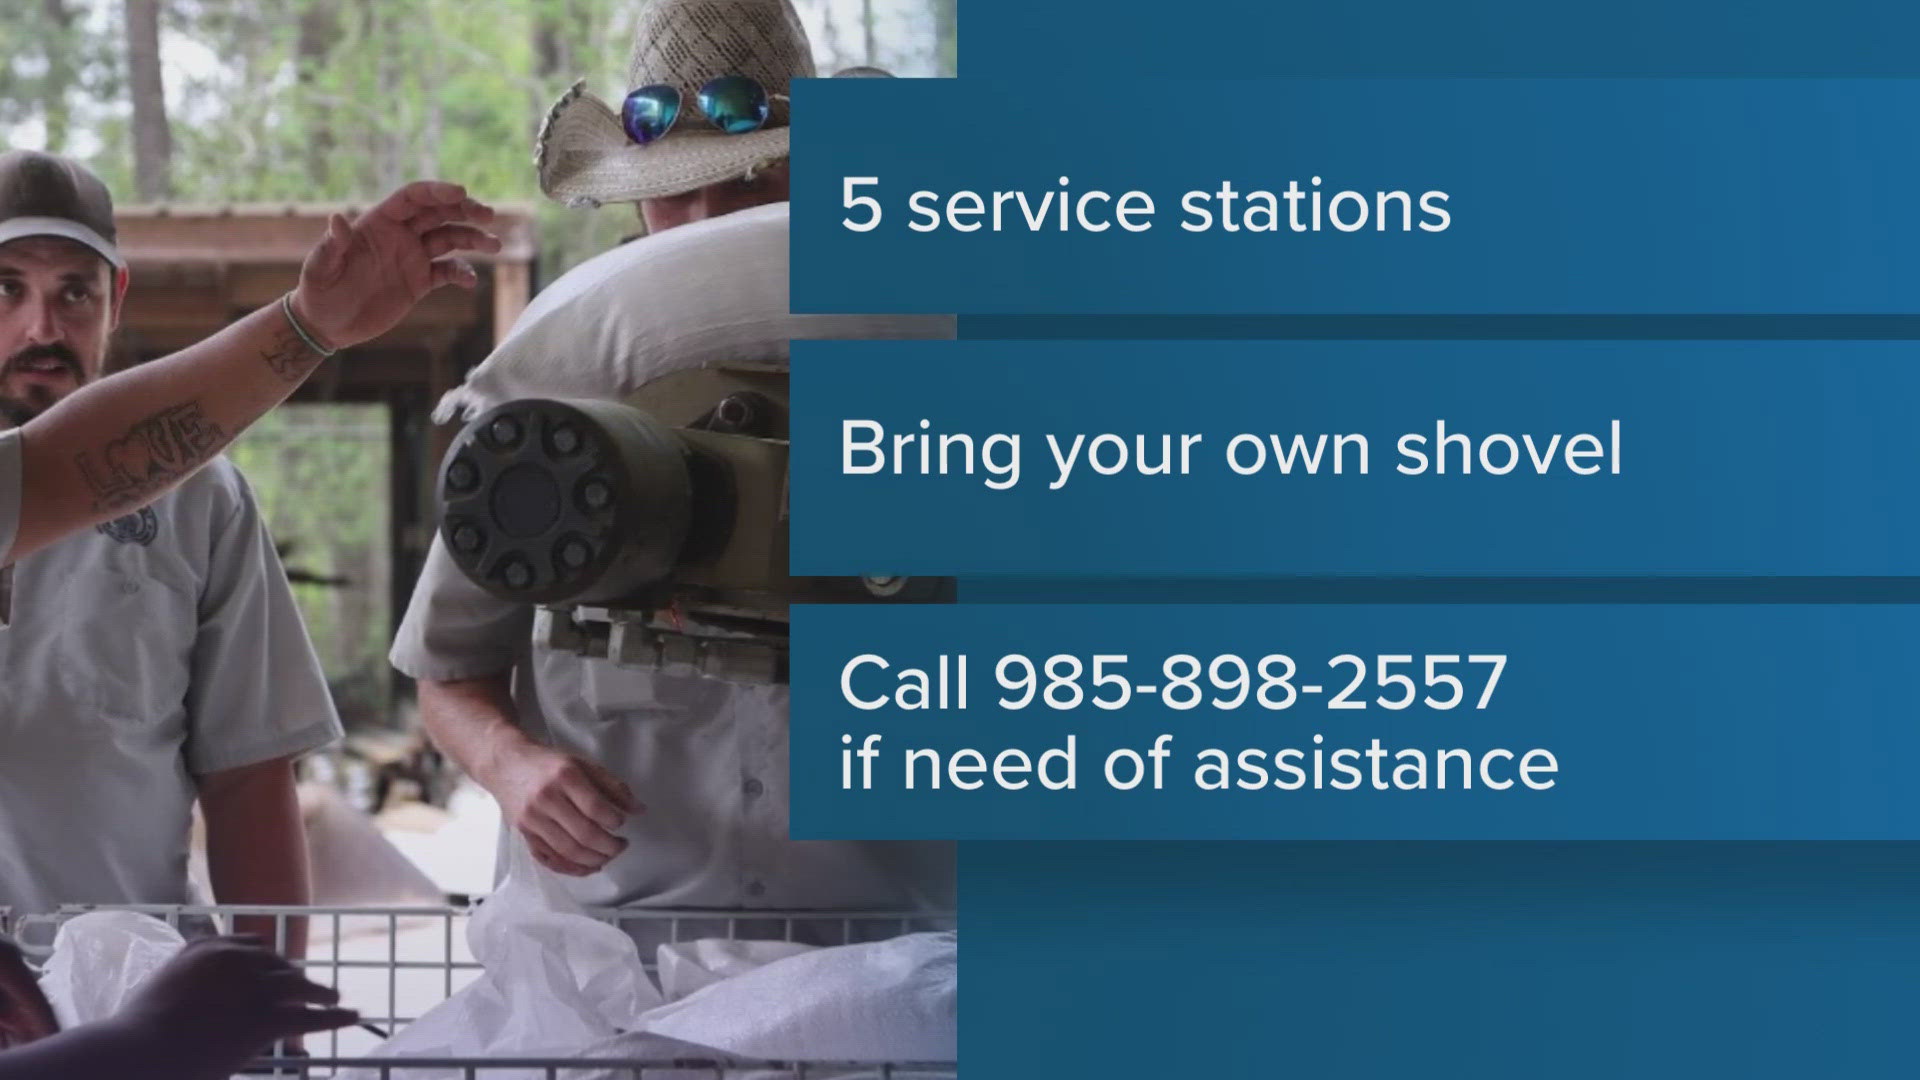 St. Tammany is offering sandbag locations in five different locations around the parish.